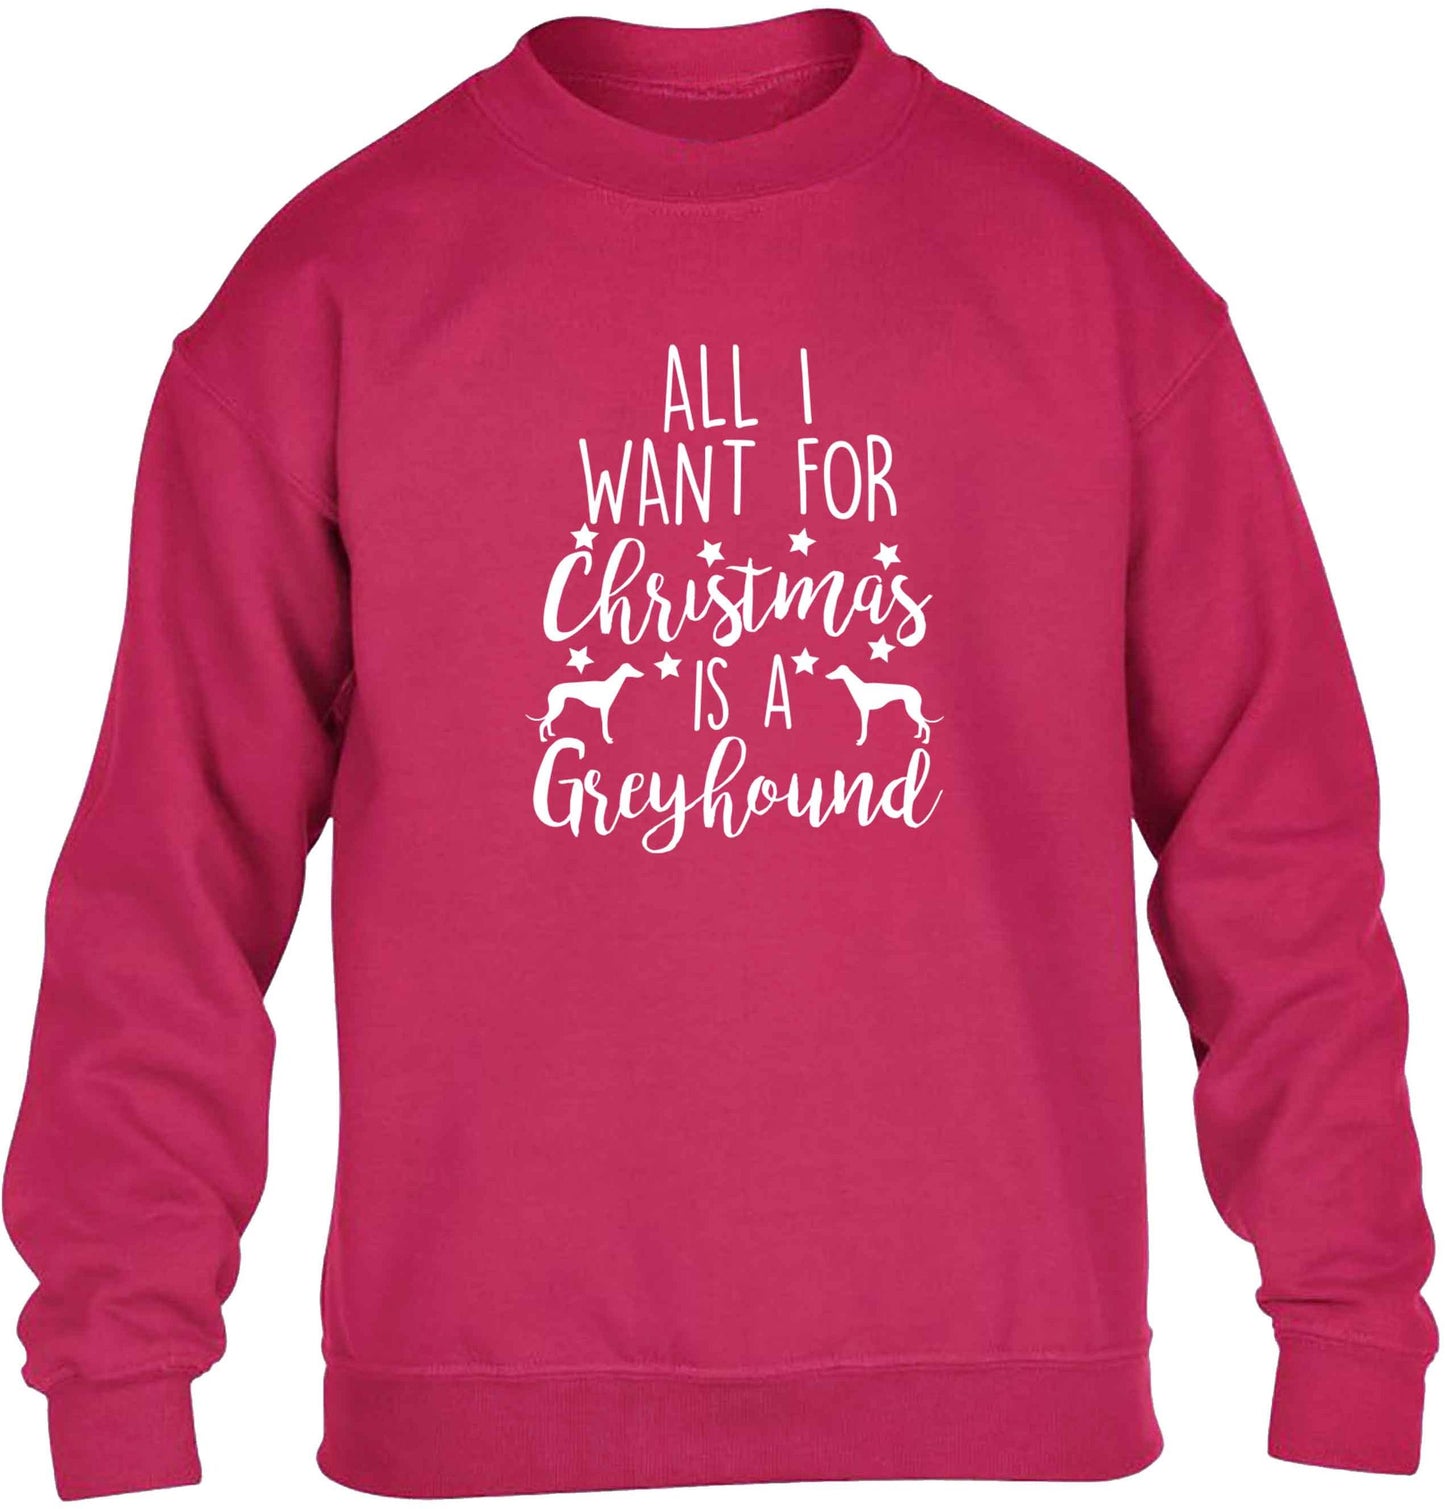 All I want for Christmas is a greyhound children's pink sweater 12-13 Years